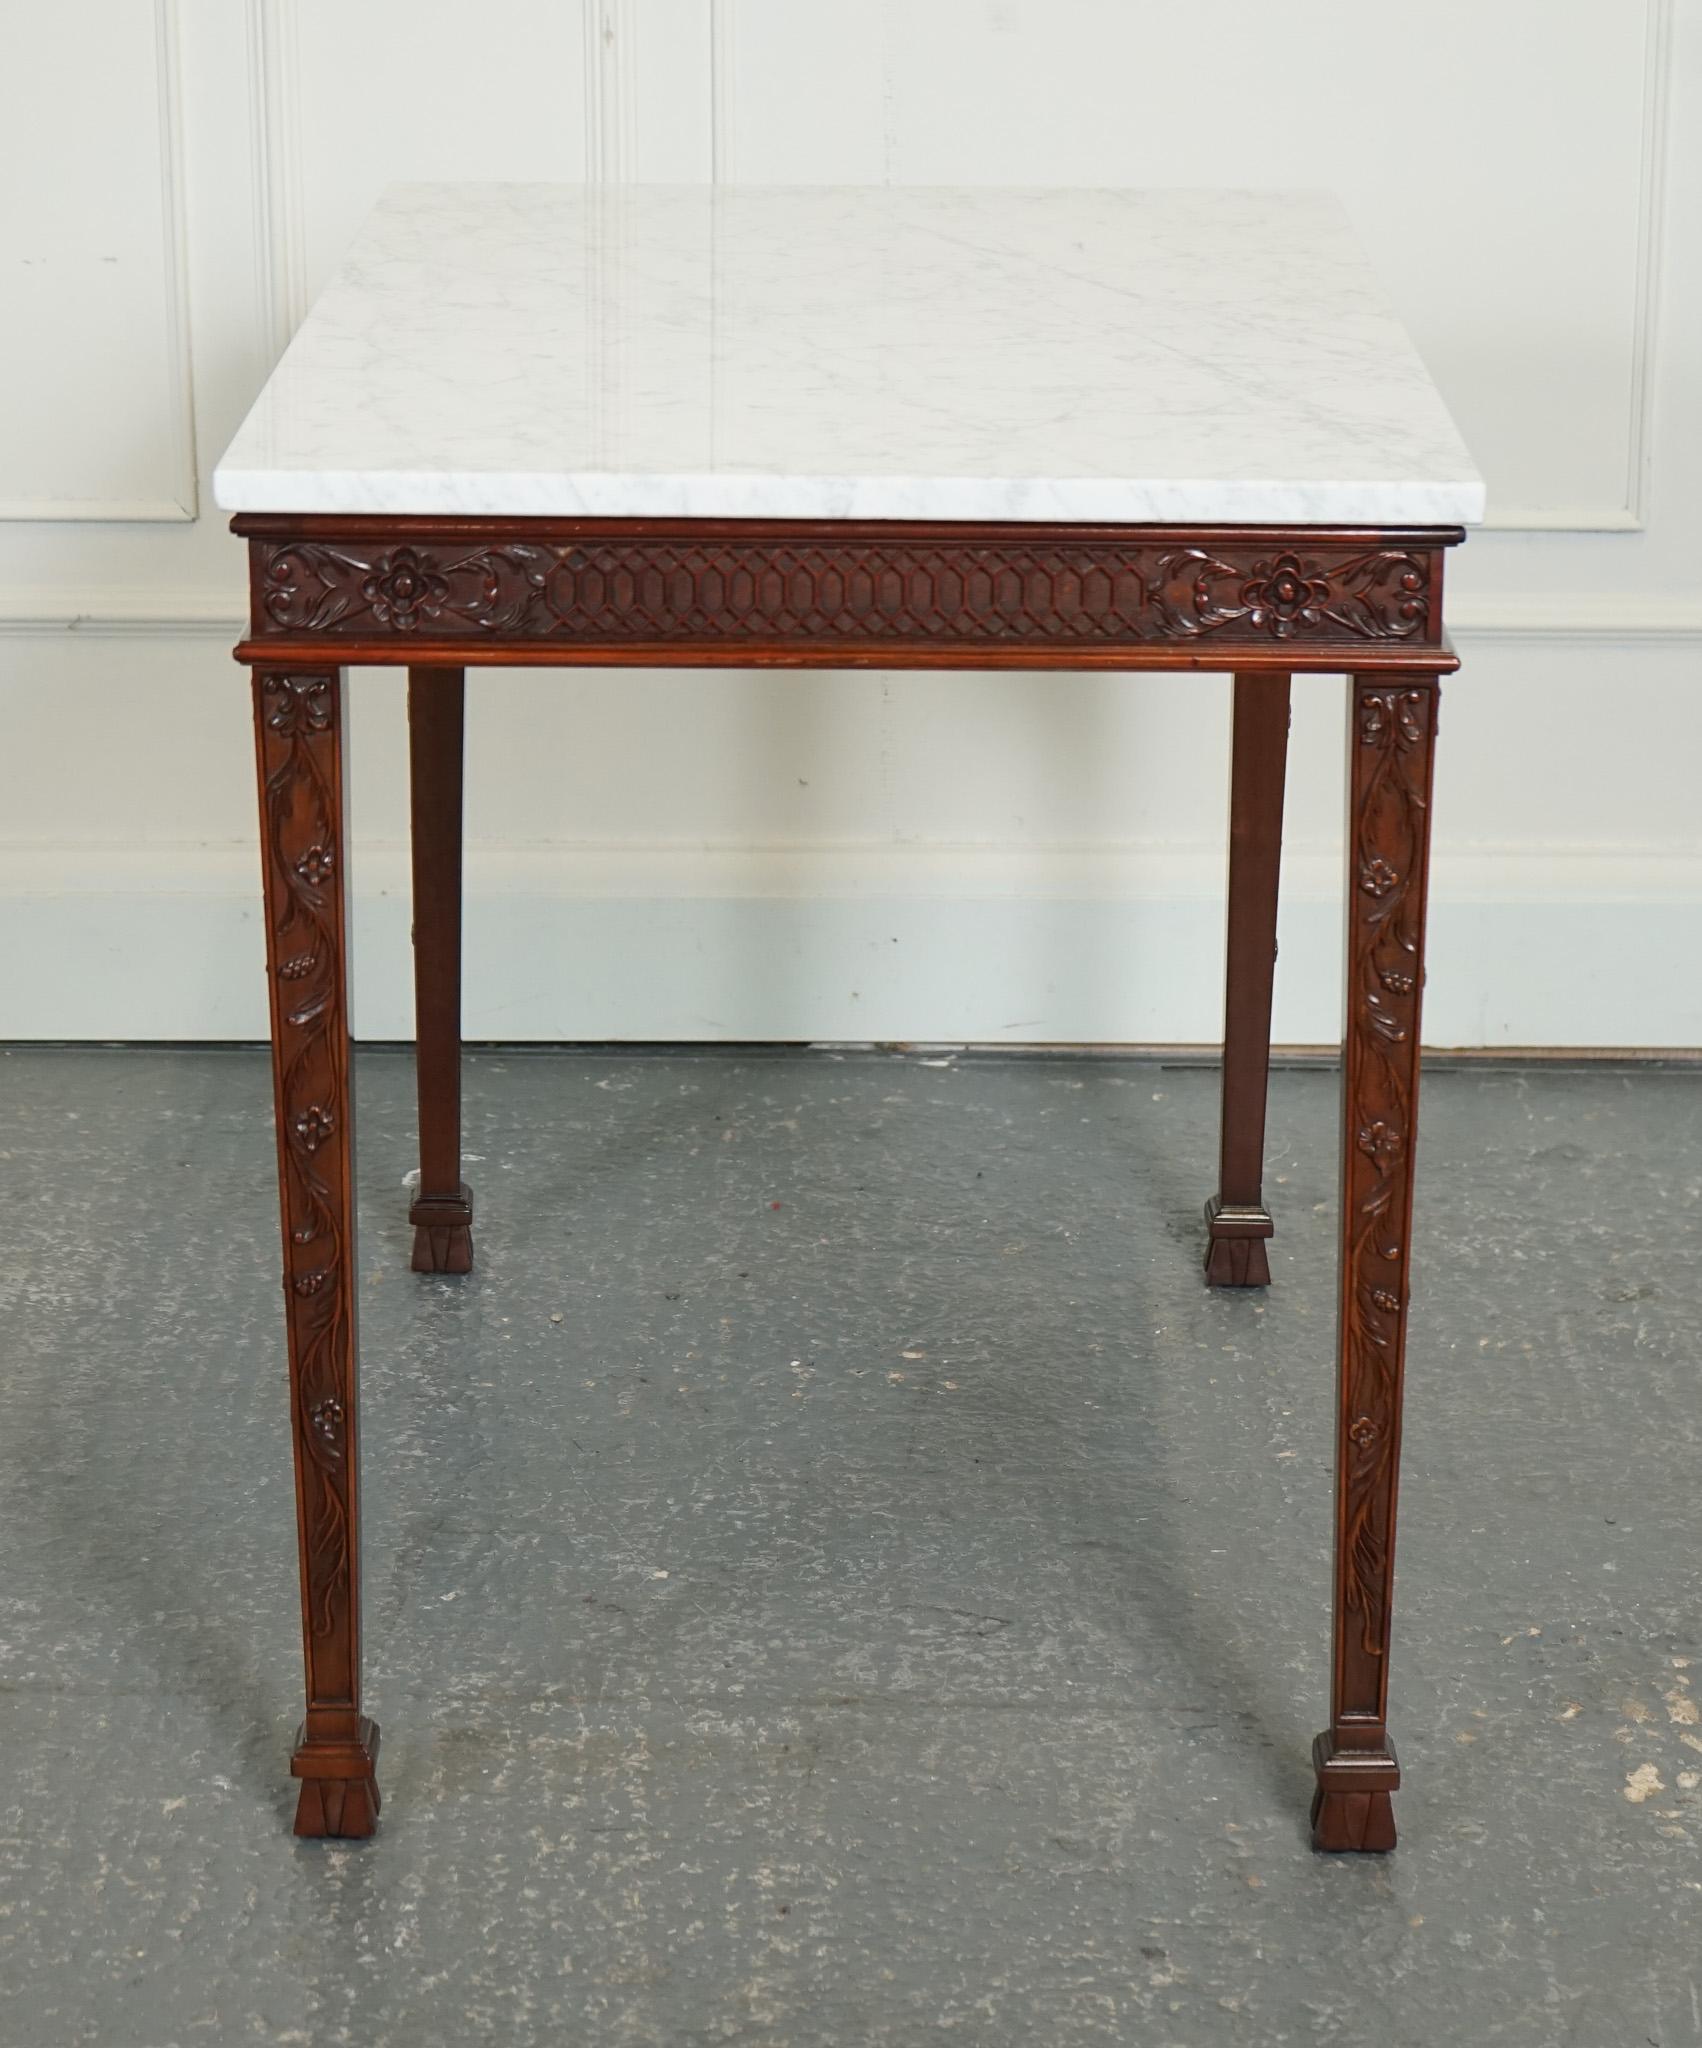 PAiR OF CHIPPENDALE  Style CONSOLE TabLES MIT NEW WHITE CARRARA MARBLE TOPS (Carrara-Marmor) im Angebot